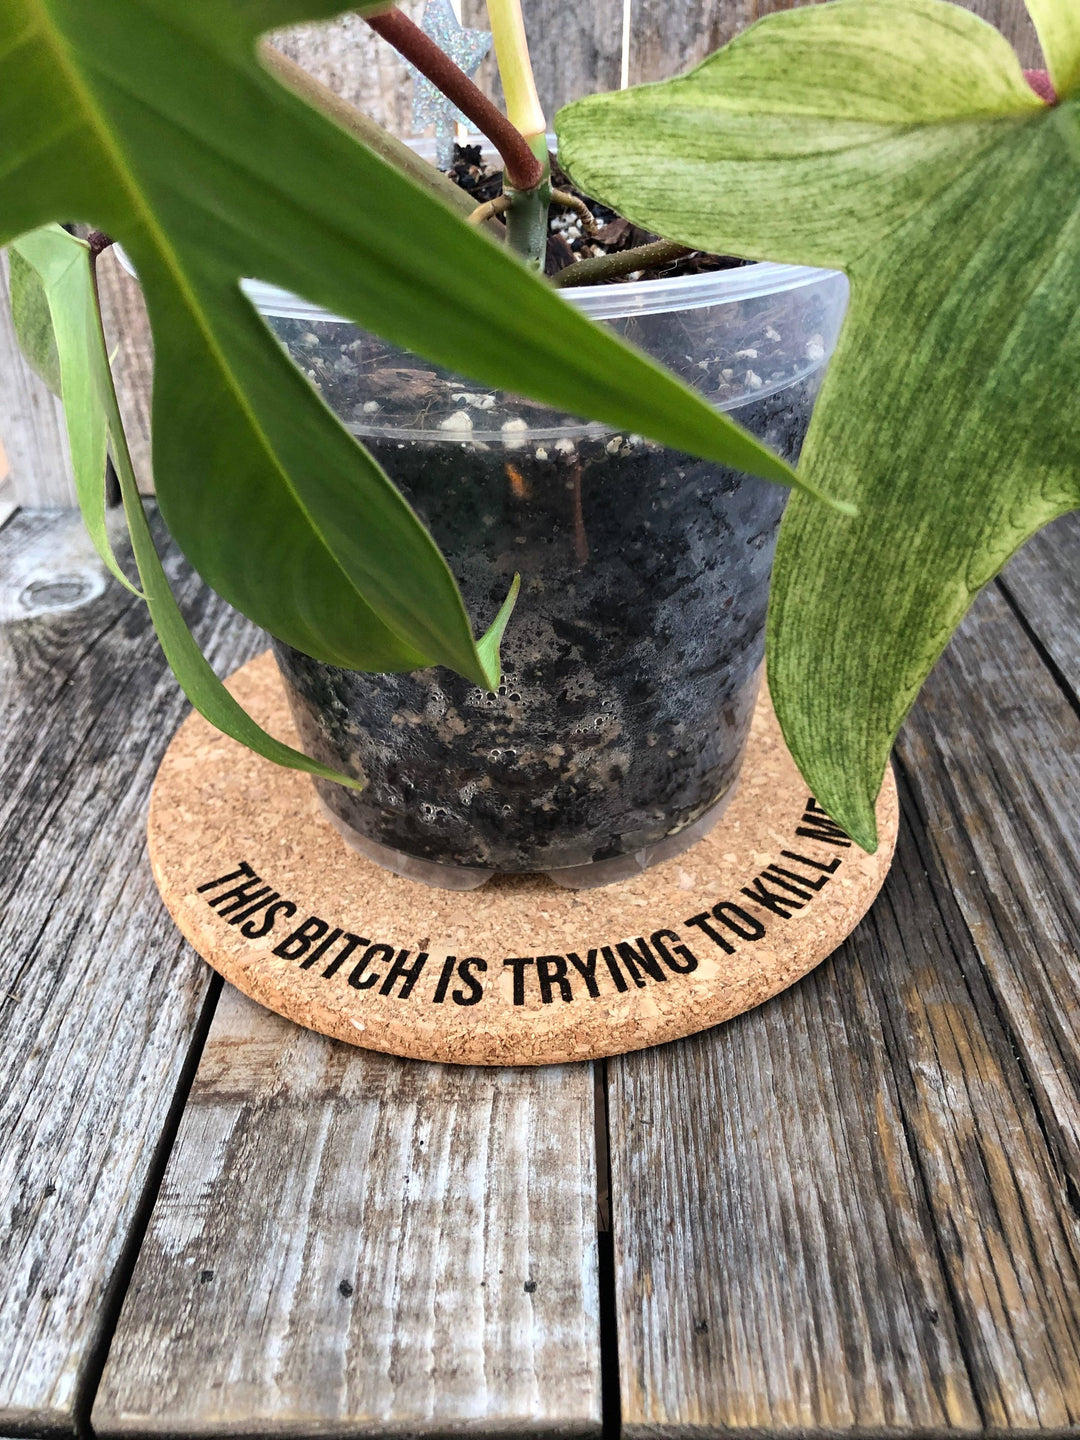 This Bitch is Trying to Kill Me Cork Plant Mat - Eng: 4 Inch Cork Plant Mat